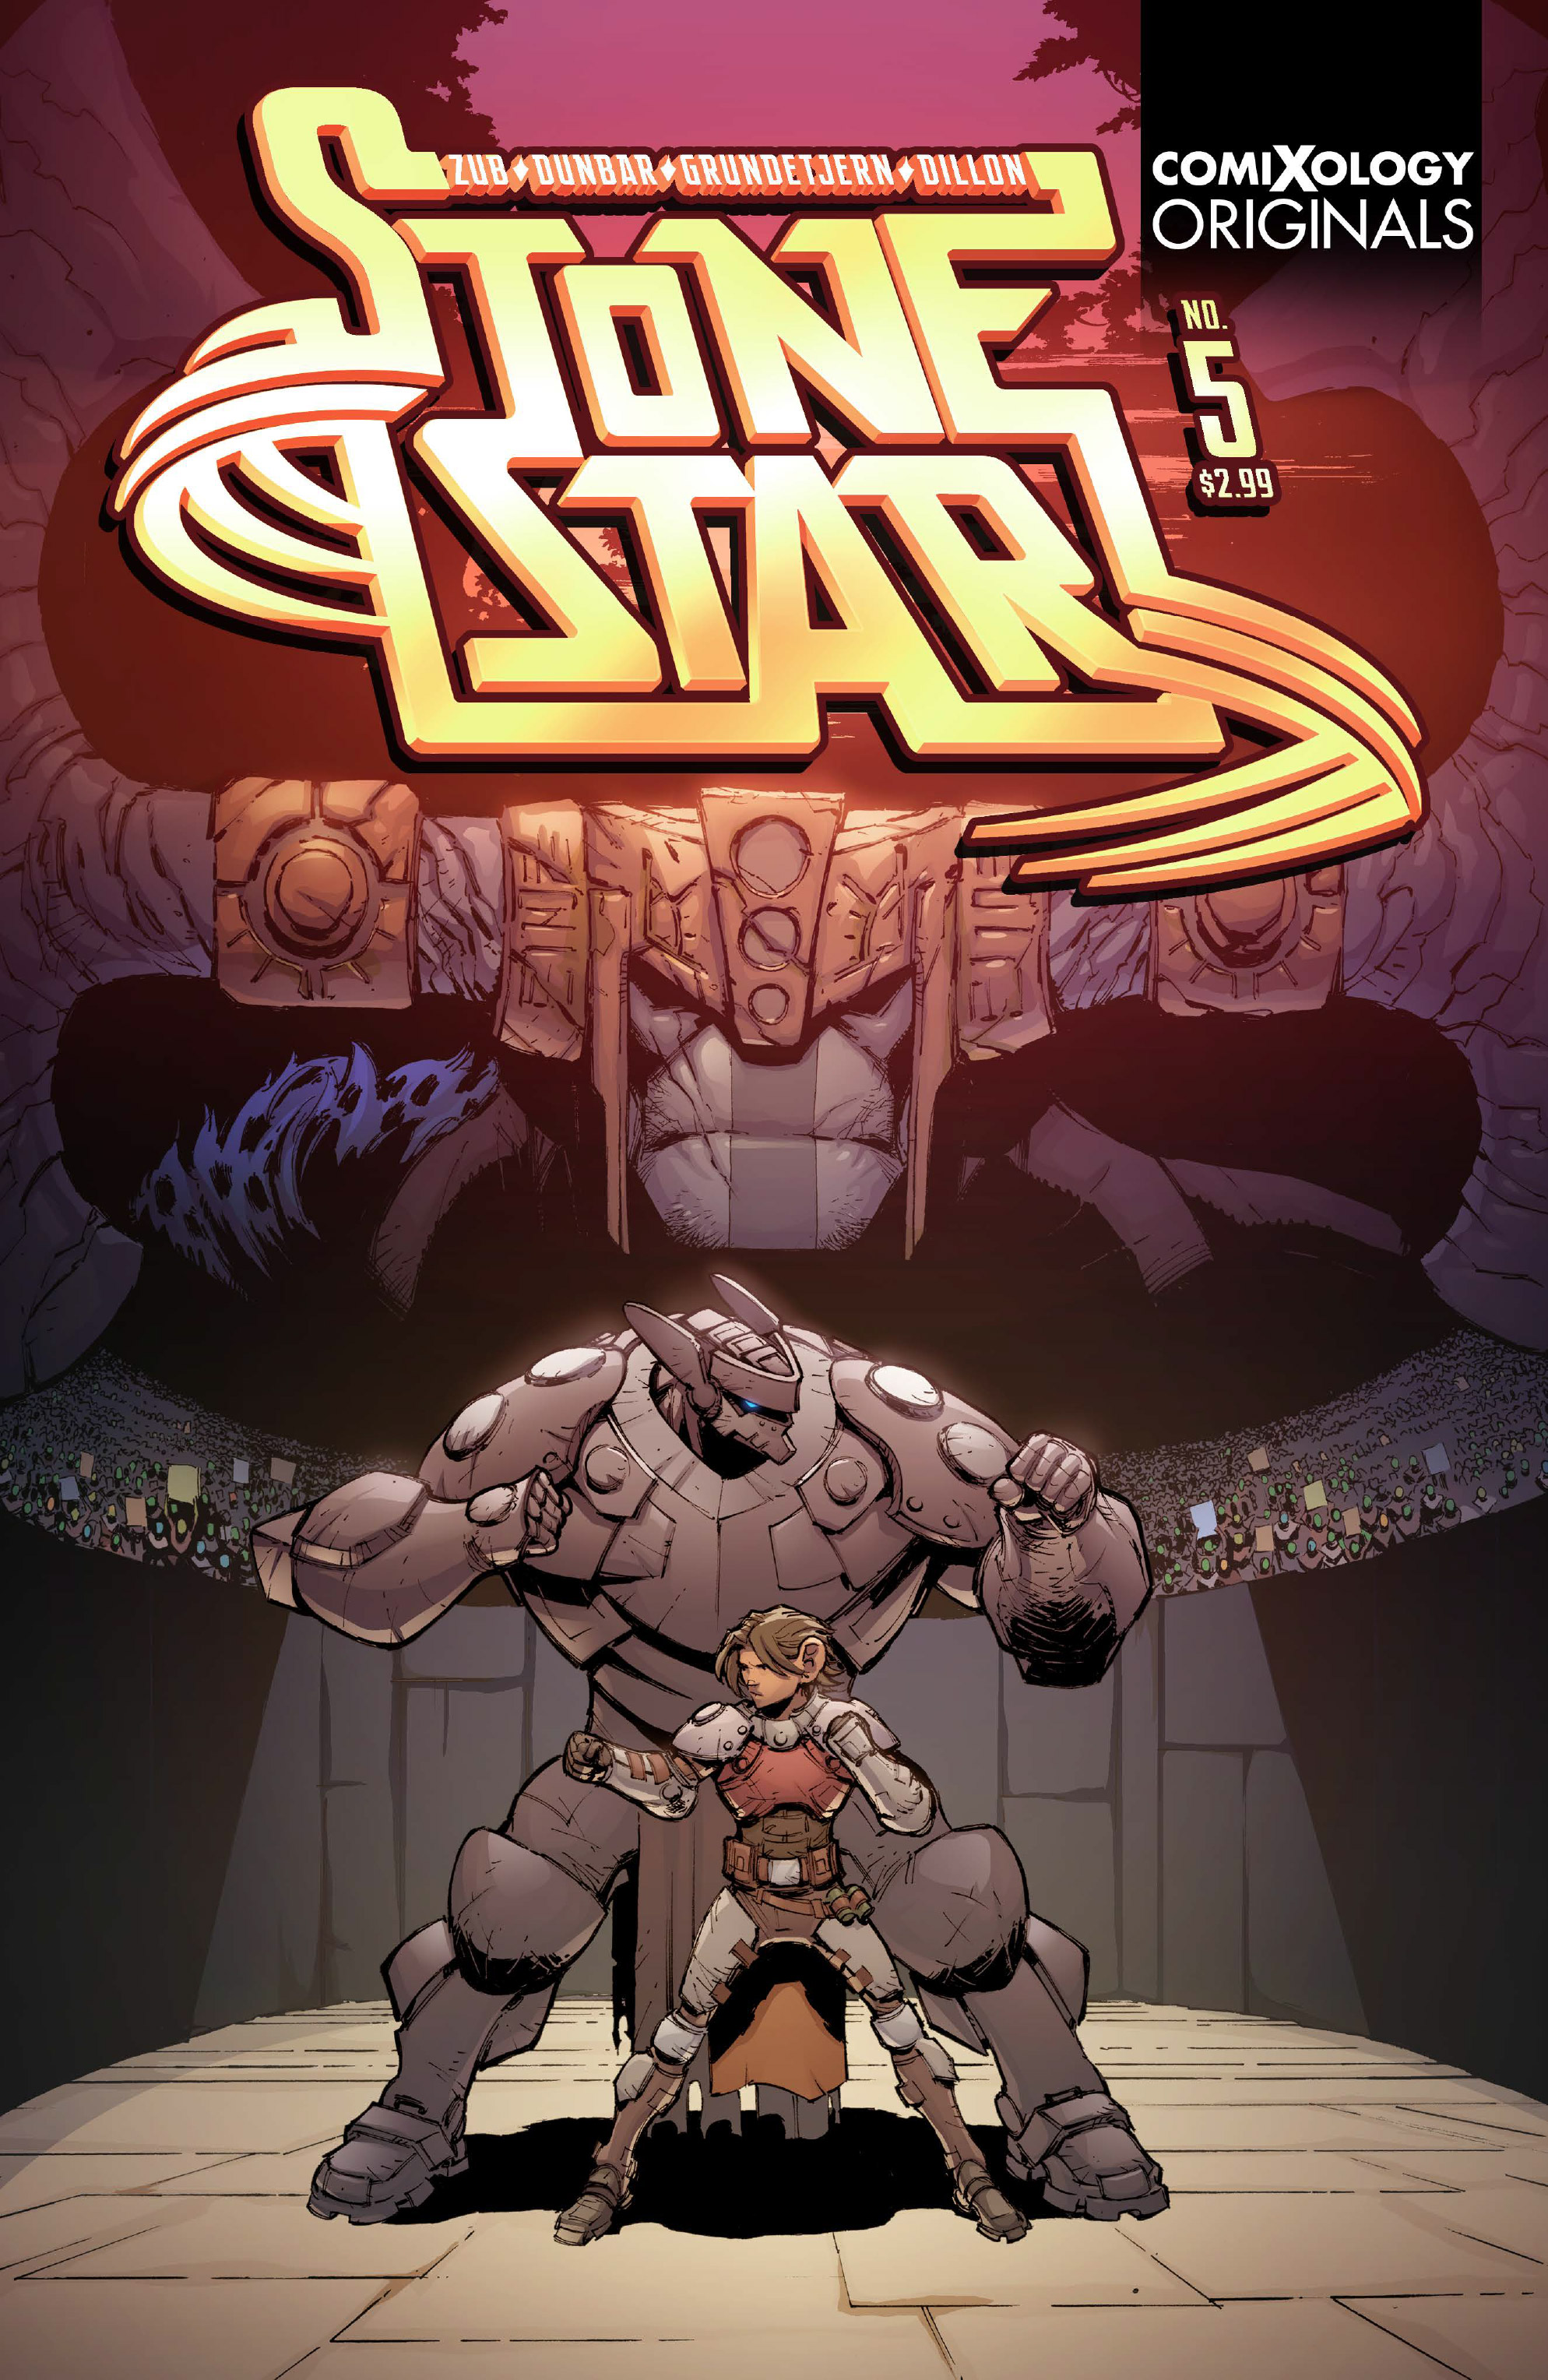 Read online Stone Star comic -  Issue #5 - 1